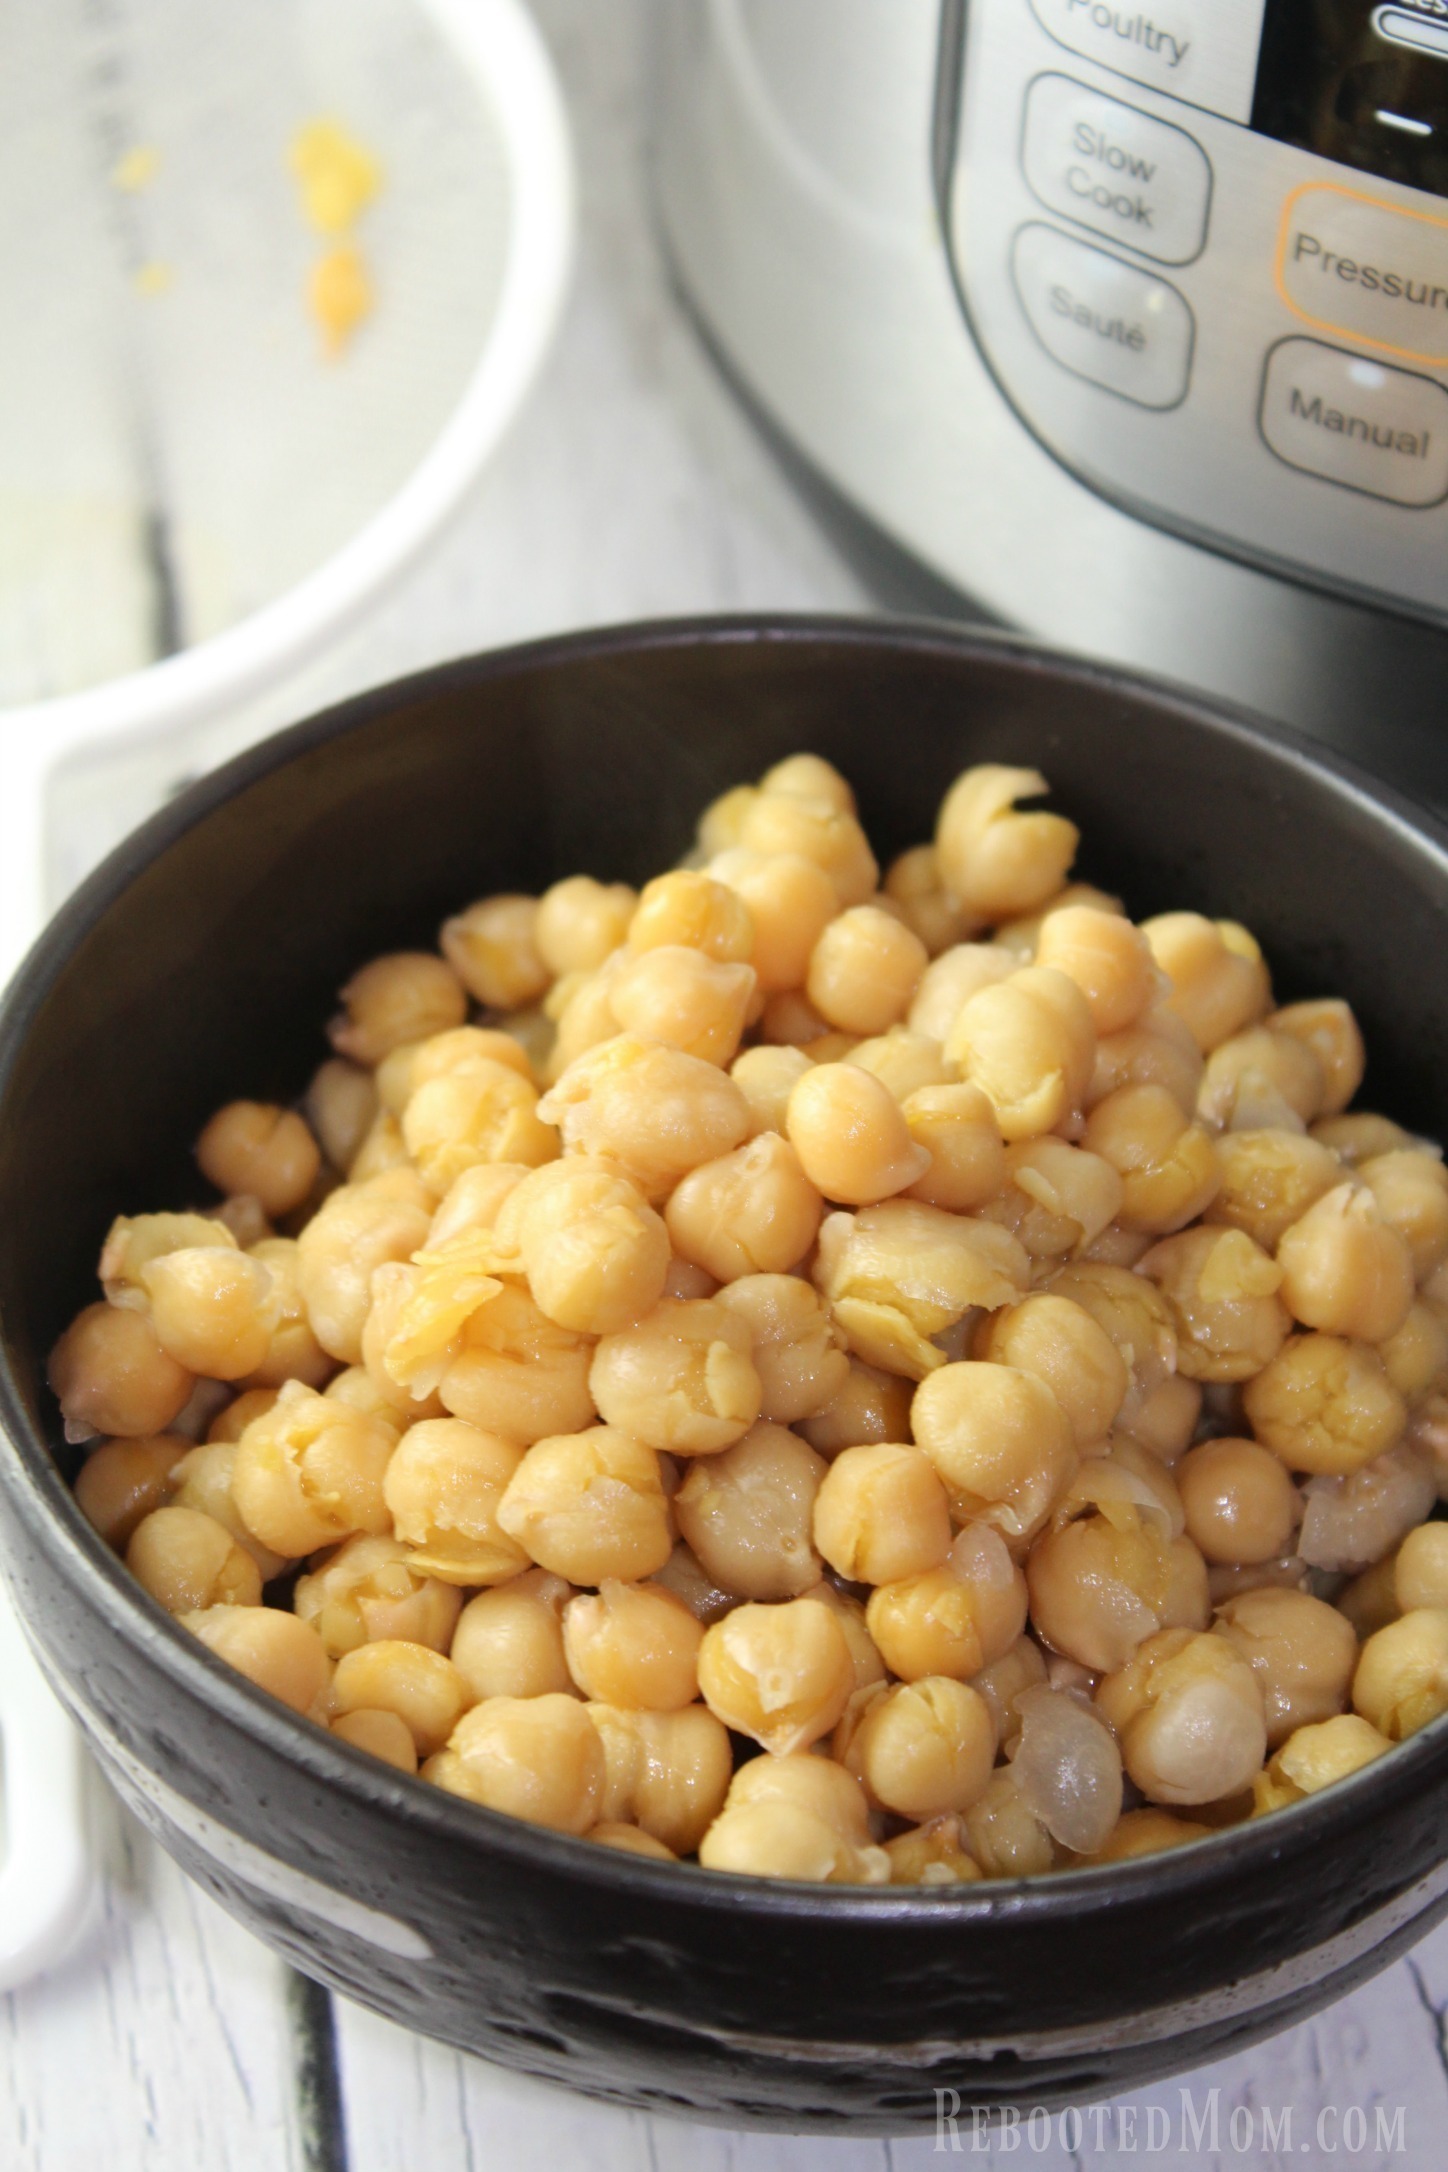 Try cooking chickpeas, or, garbanzo beans, in the Instant Pot or pressure cooker. This no-frills method is quick and easy!